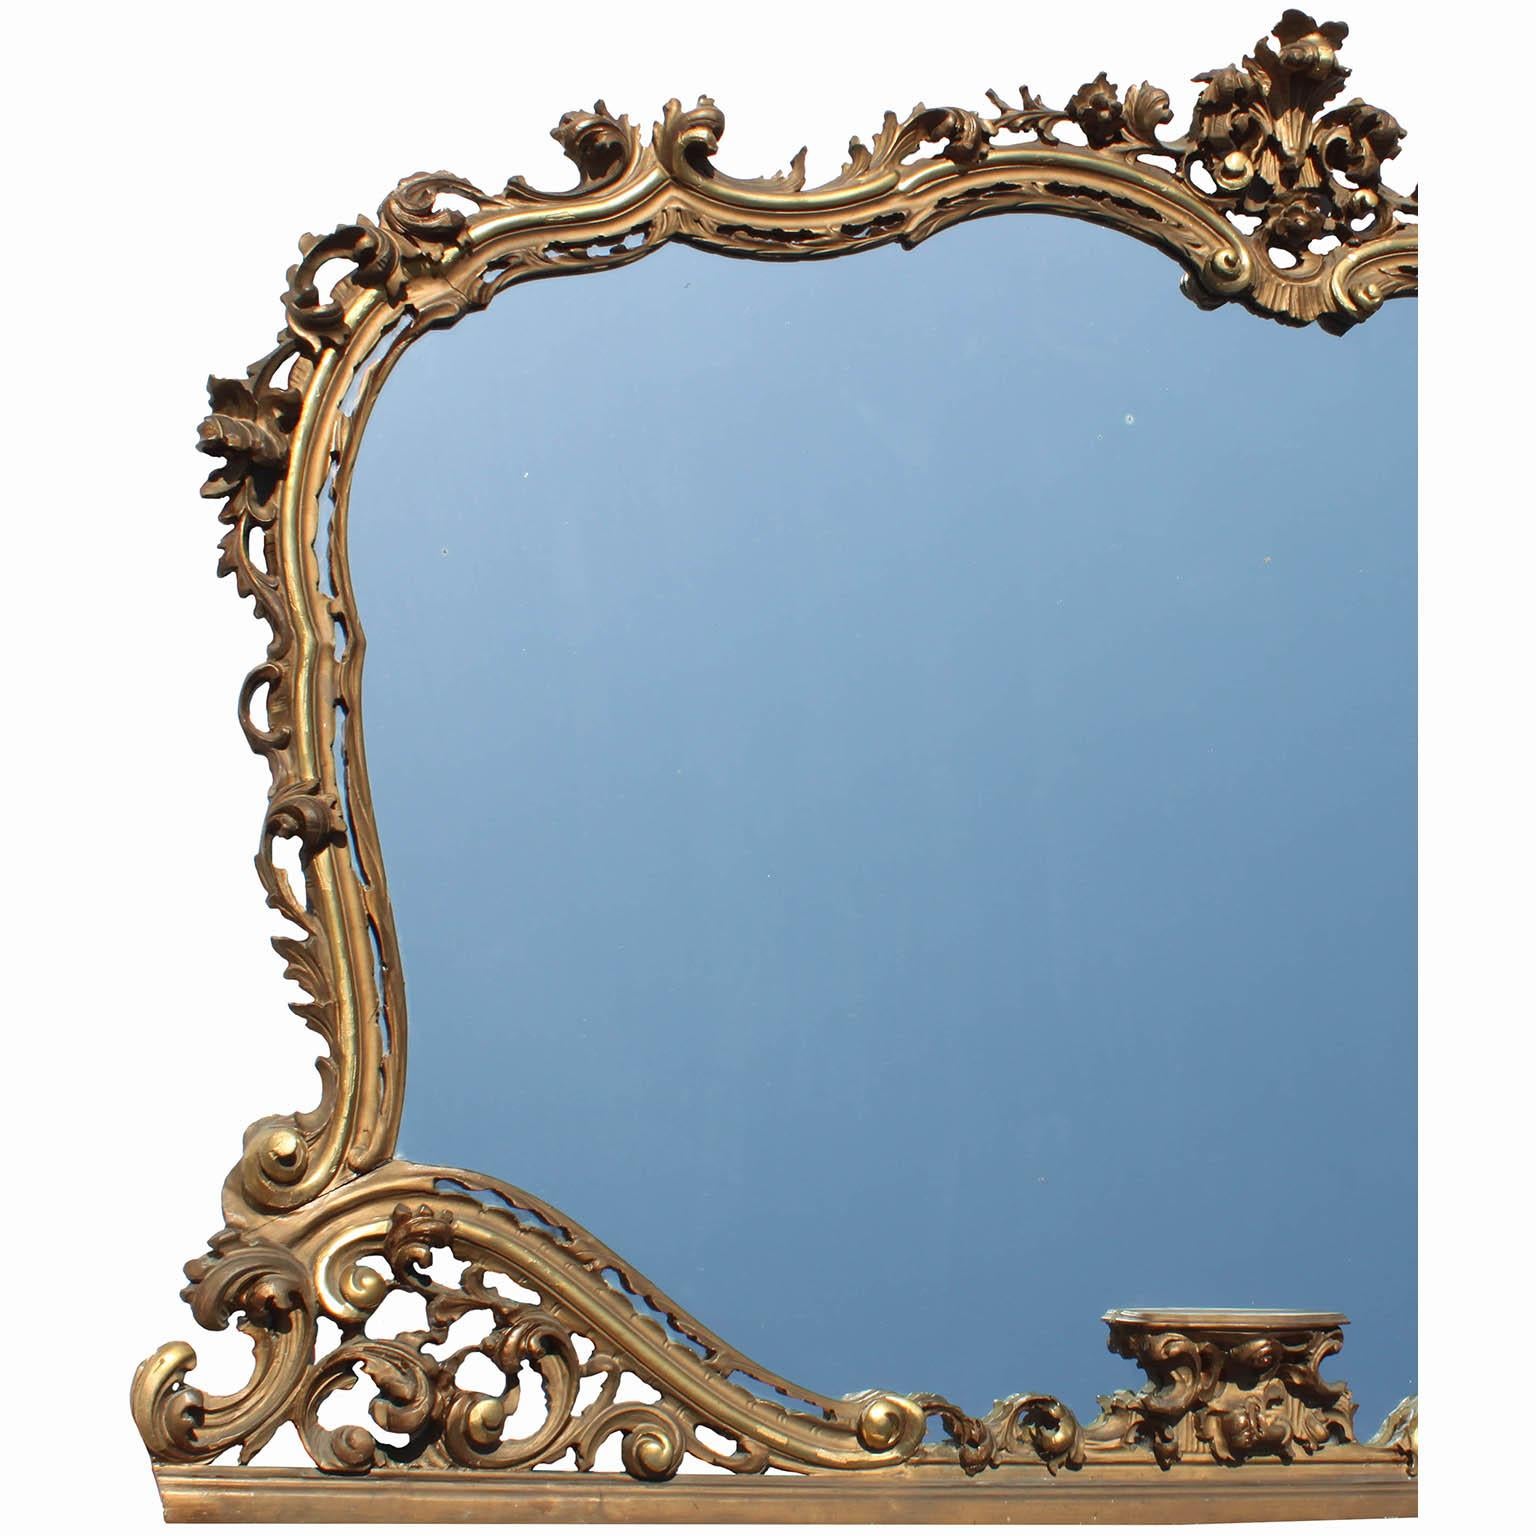 A Large French Louis XV Style 'Belle Époque' ornately carved giltwood overmantel mirror frame. The intricately carved frame is crowned with a floral-leaf arrangement, featuring pierced carvings of flowers, leaves, scrolls, and acanthus. The bottom